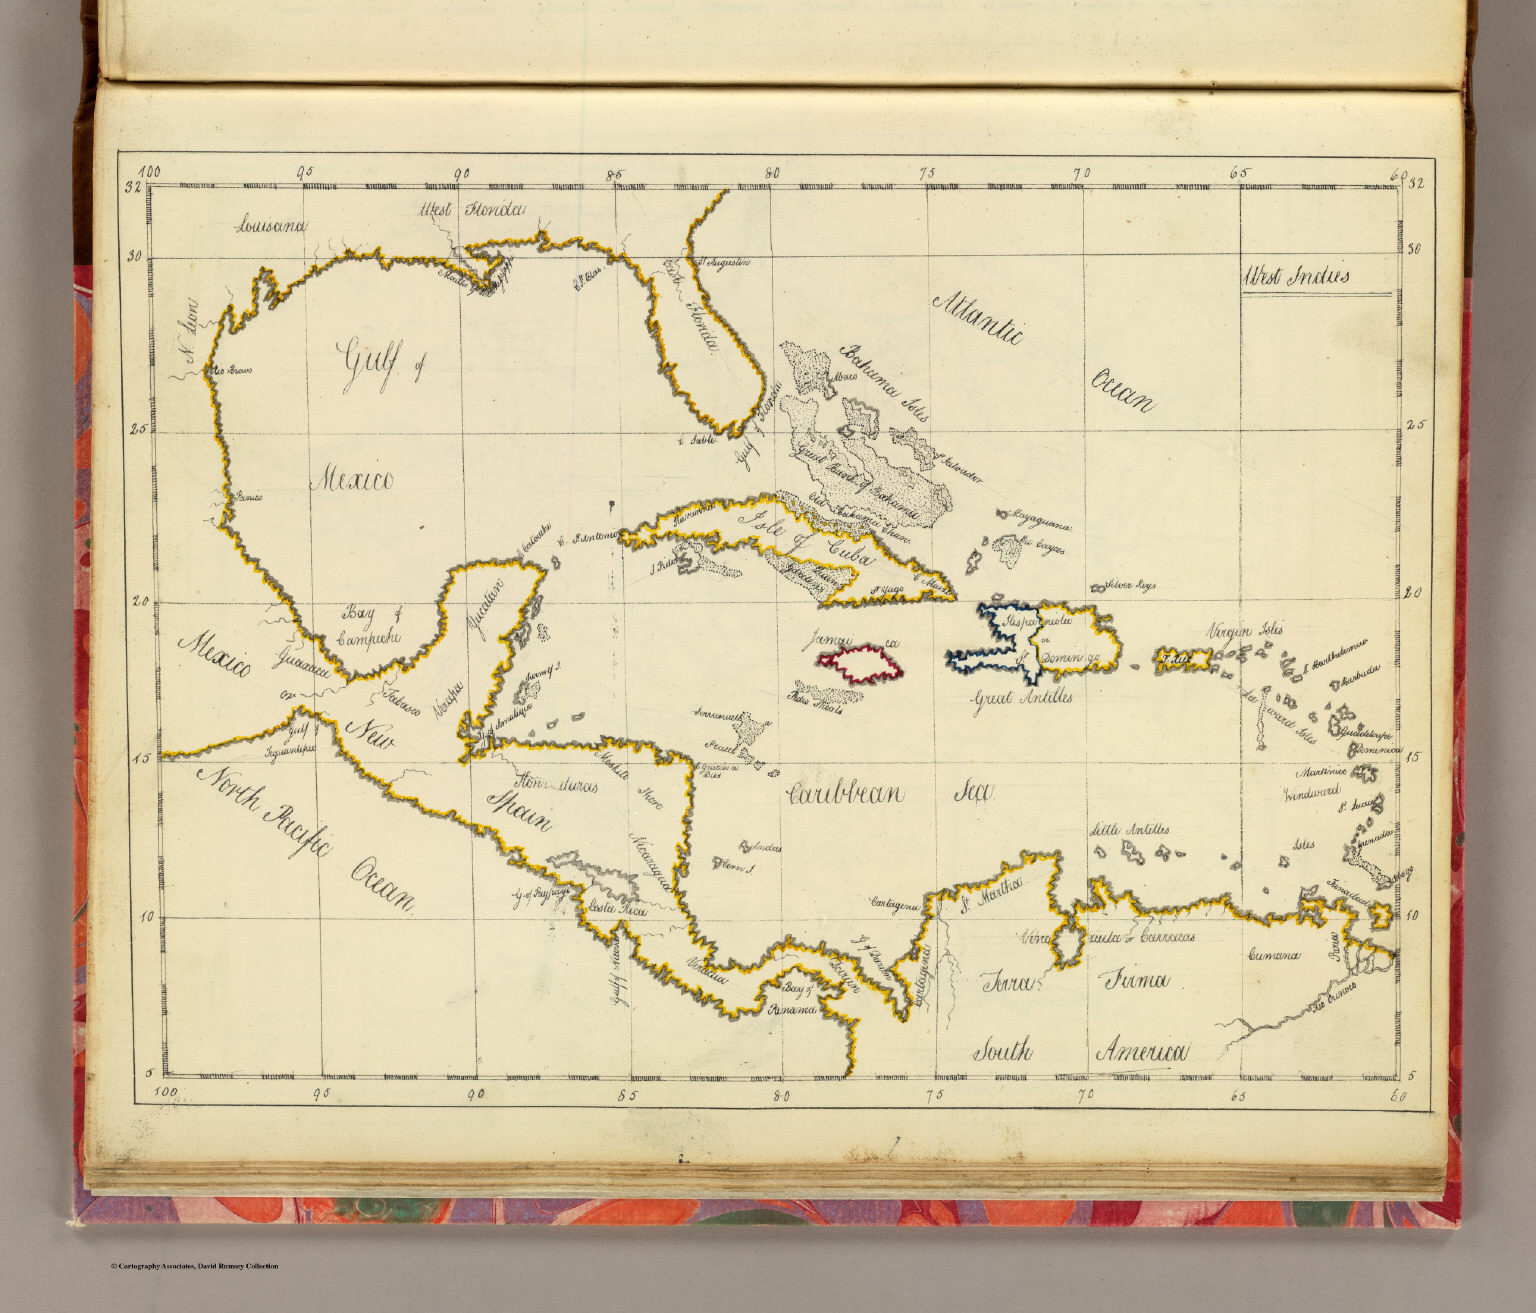 West Indies David Rumsey Historical Map Collection 7824